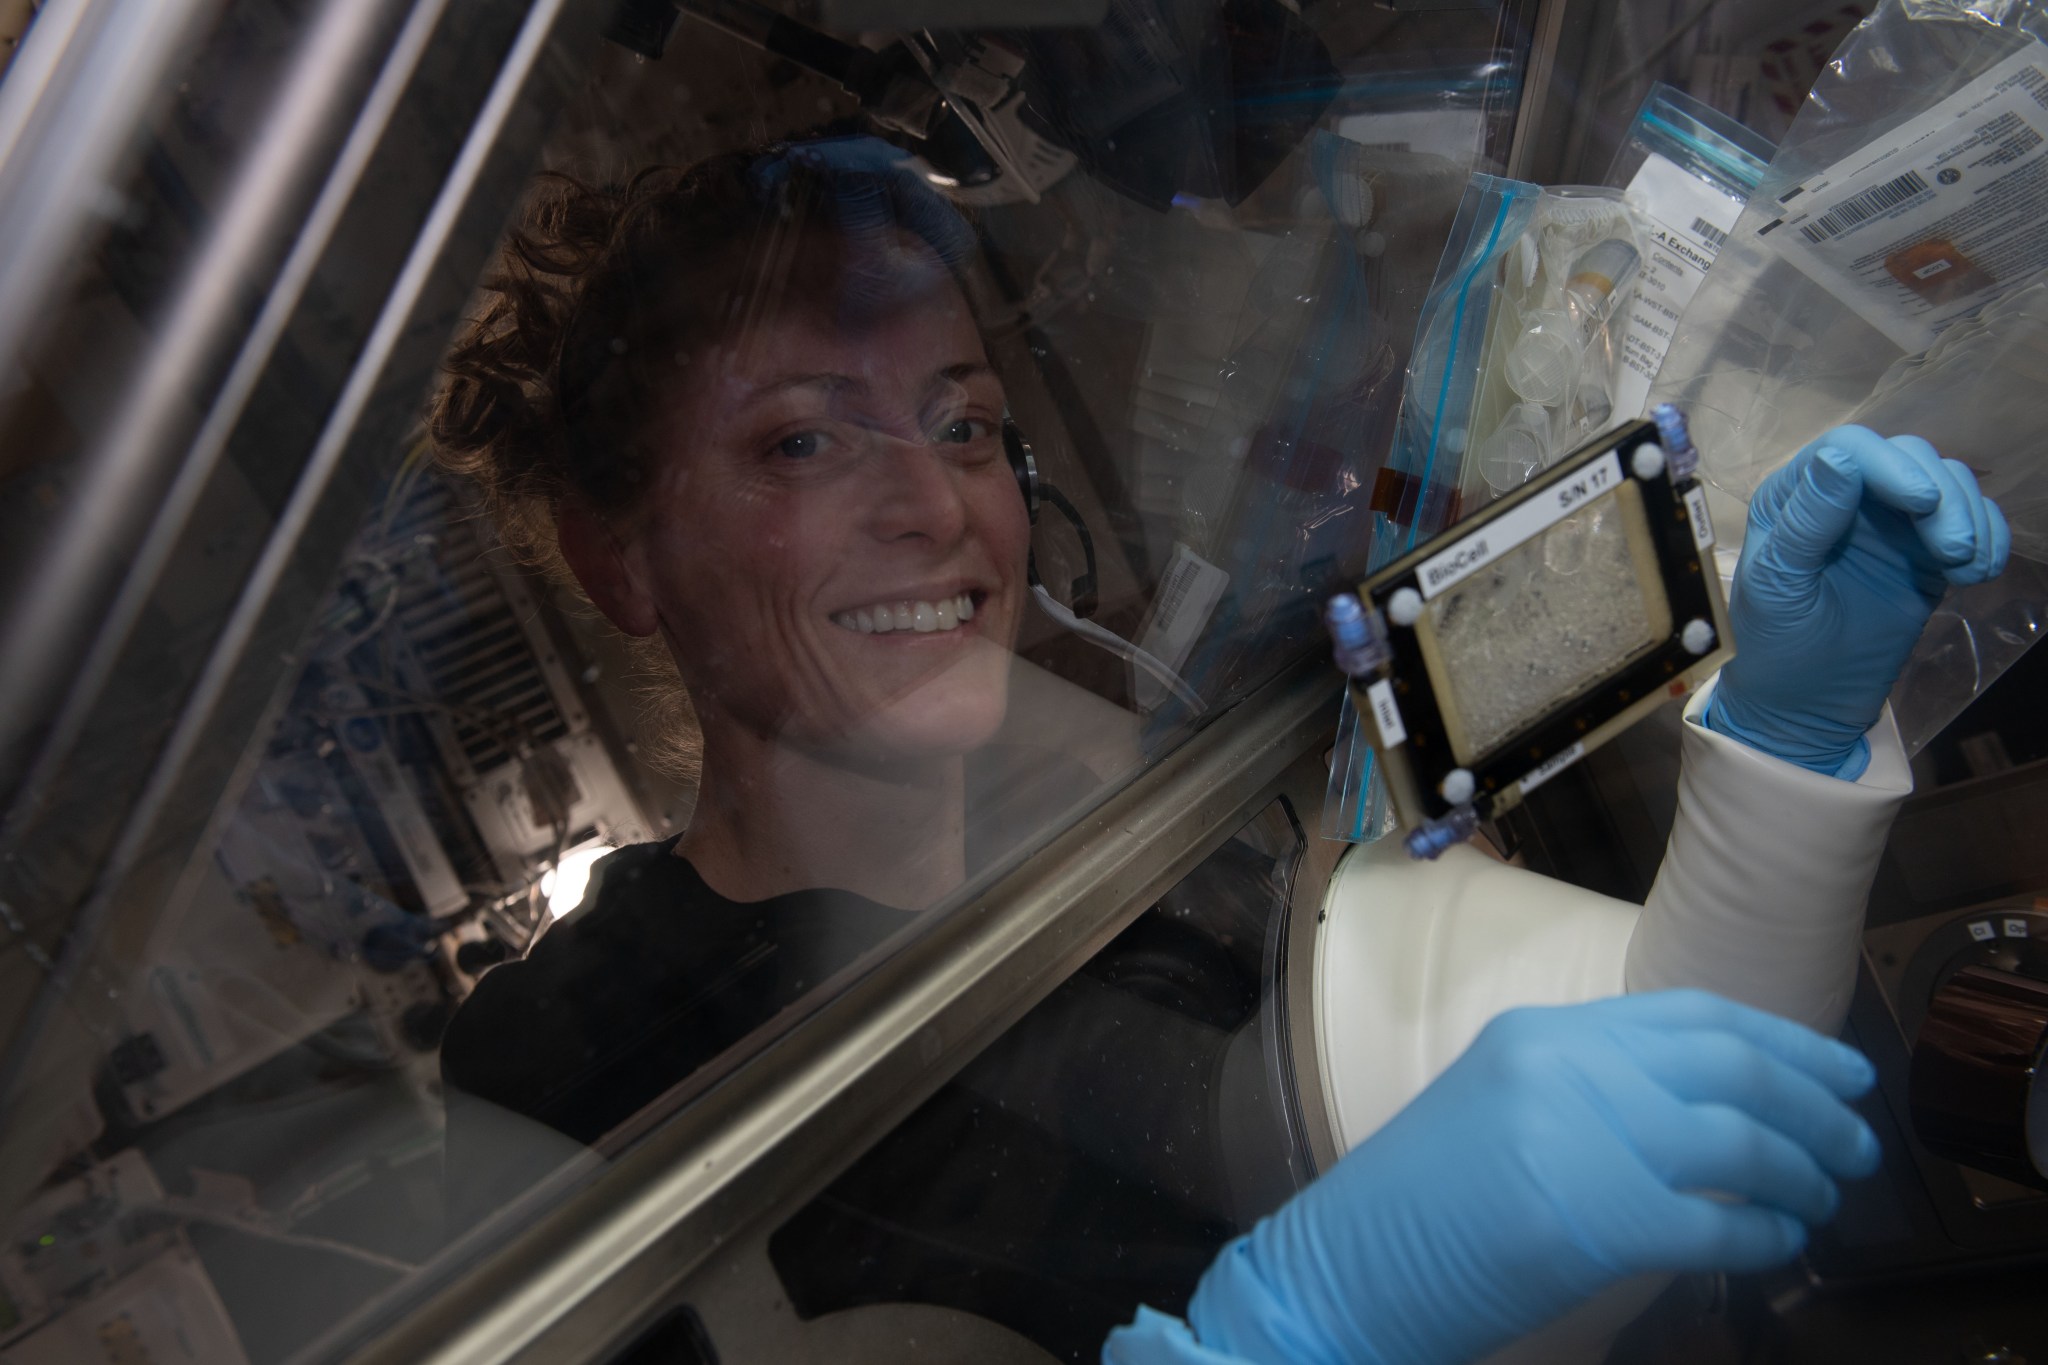 NASA astronaut and Expedition 70 Flight Engineer Loral O'Hara works on a bone cell study inside the Life Science Glovebox located inside the International Space Station's Kibo laboratory module. O’Hara was working on the Microgravity Associated Bone Loss-A investigation that may provide a better understanding of space-caused bone loss and aging-related bone conditions on Earth.